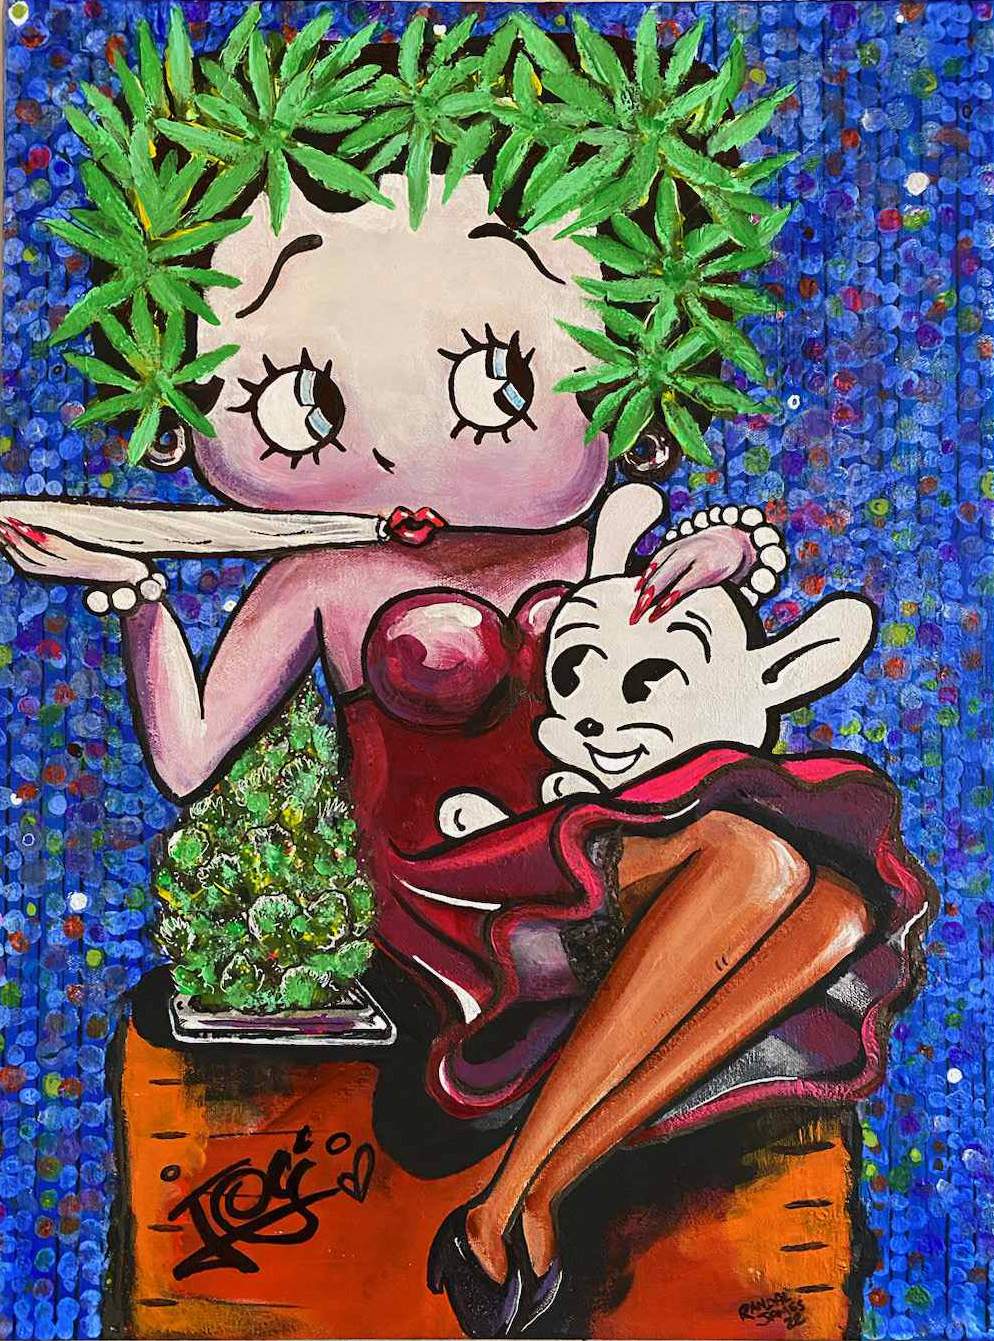 JOY Series: 18x24 Acrylic on canvas. Available to view at Giggles Cannabis (1026 Queen St. E, TO)